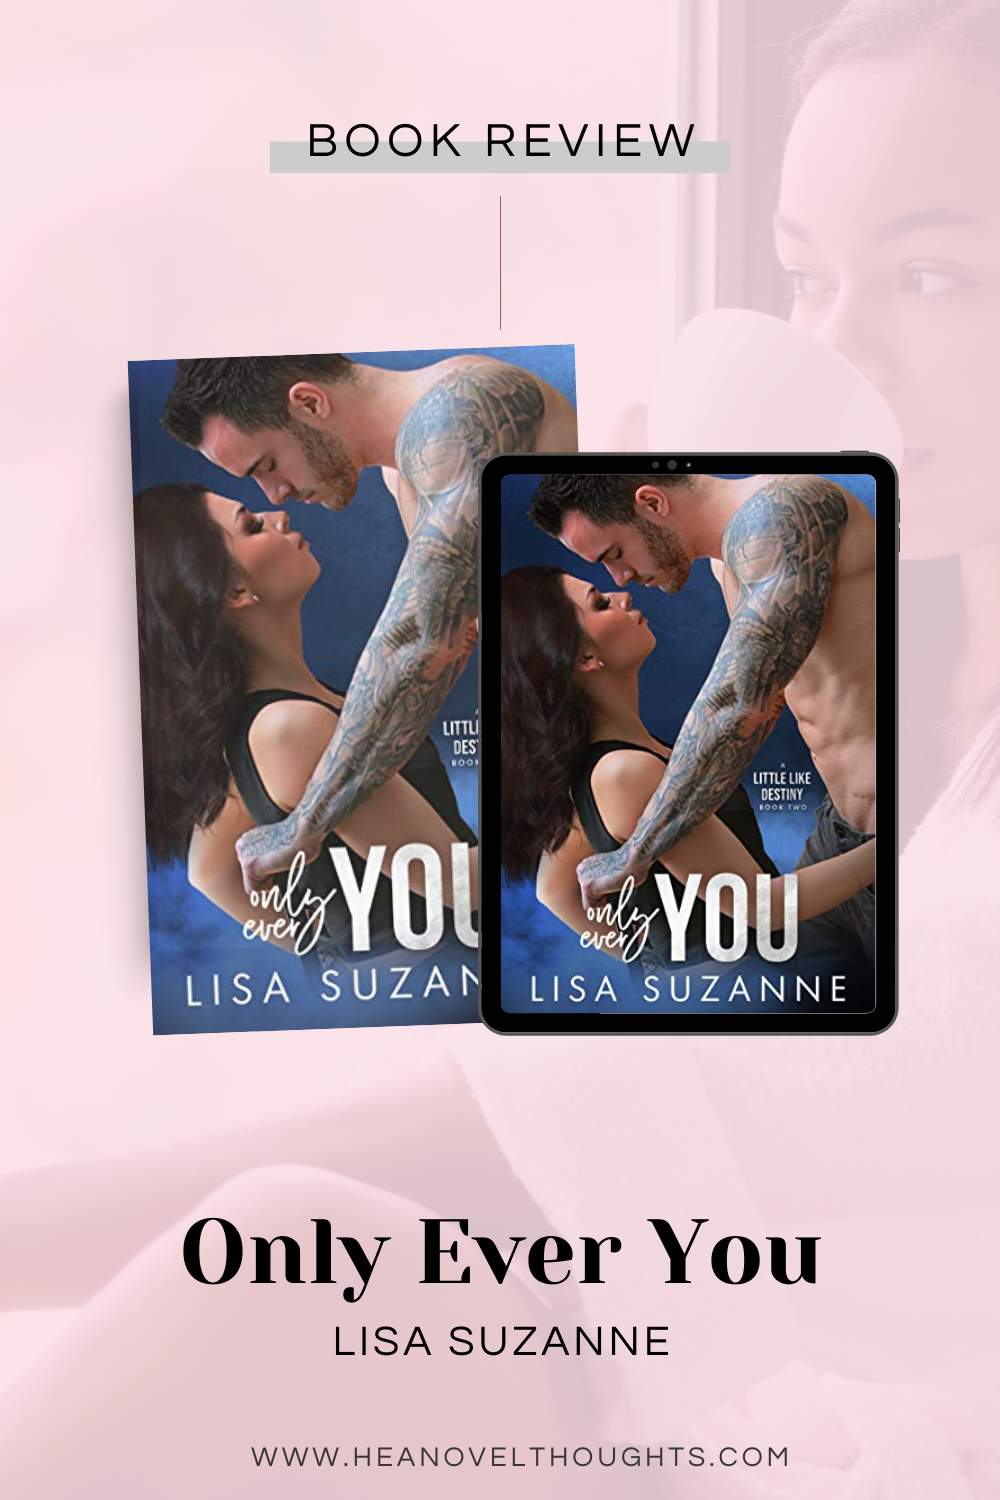 Only Ever You by Lisa Suzanne